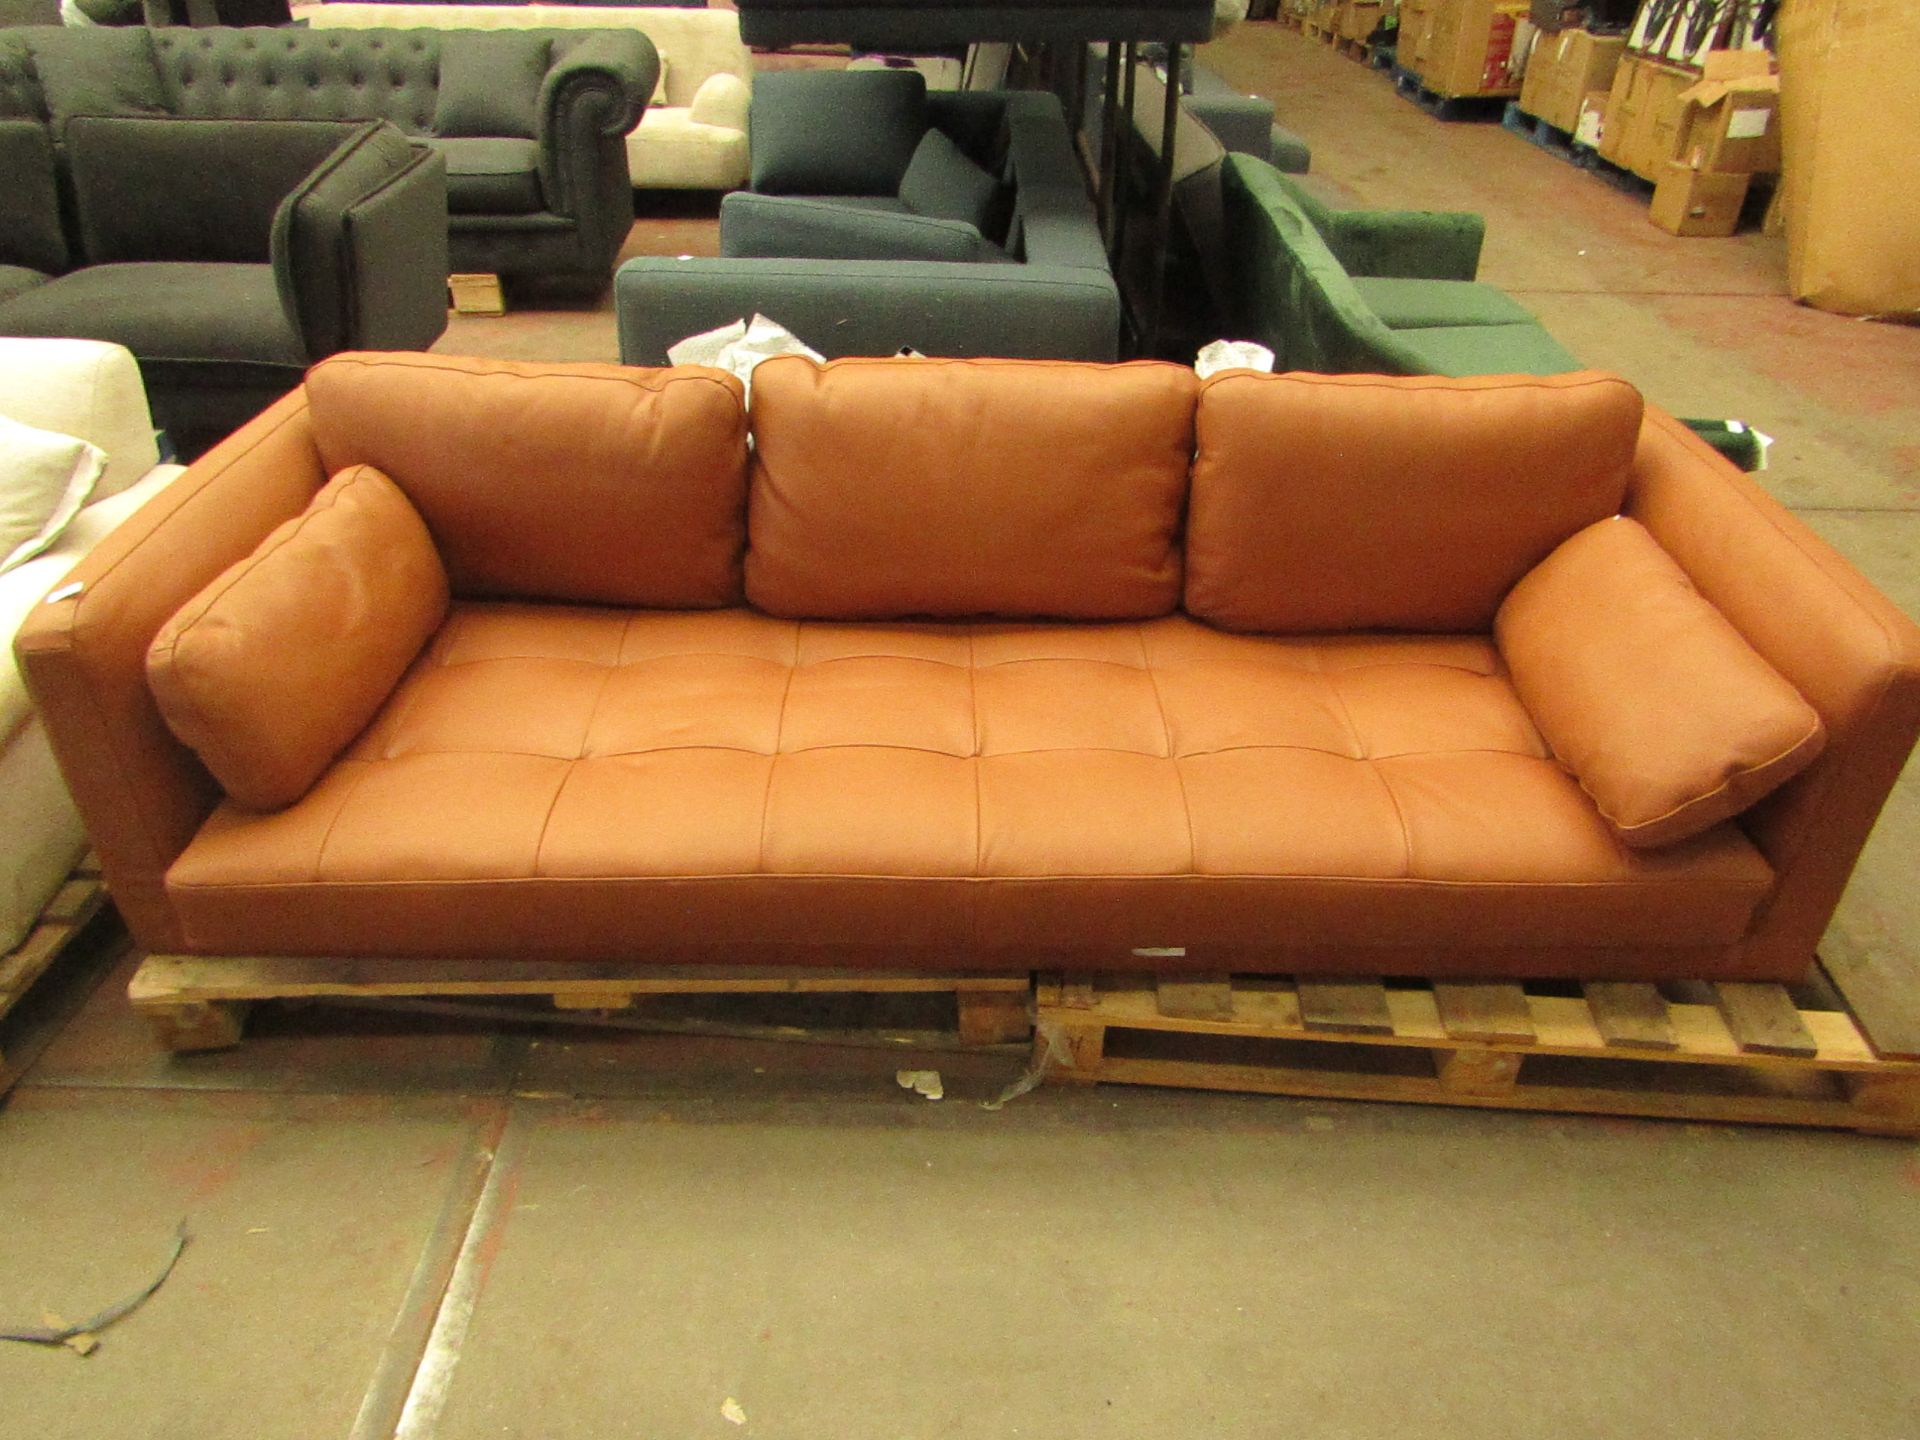 | 1X | MADE.COM 3 SEATER LEATHER SOFA | NO MAJOR DAMAGE (PLEASE NOTE, THIS DOES NOT PROVIDE ANY